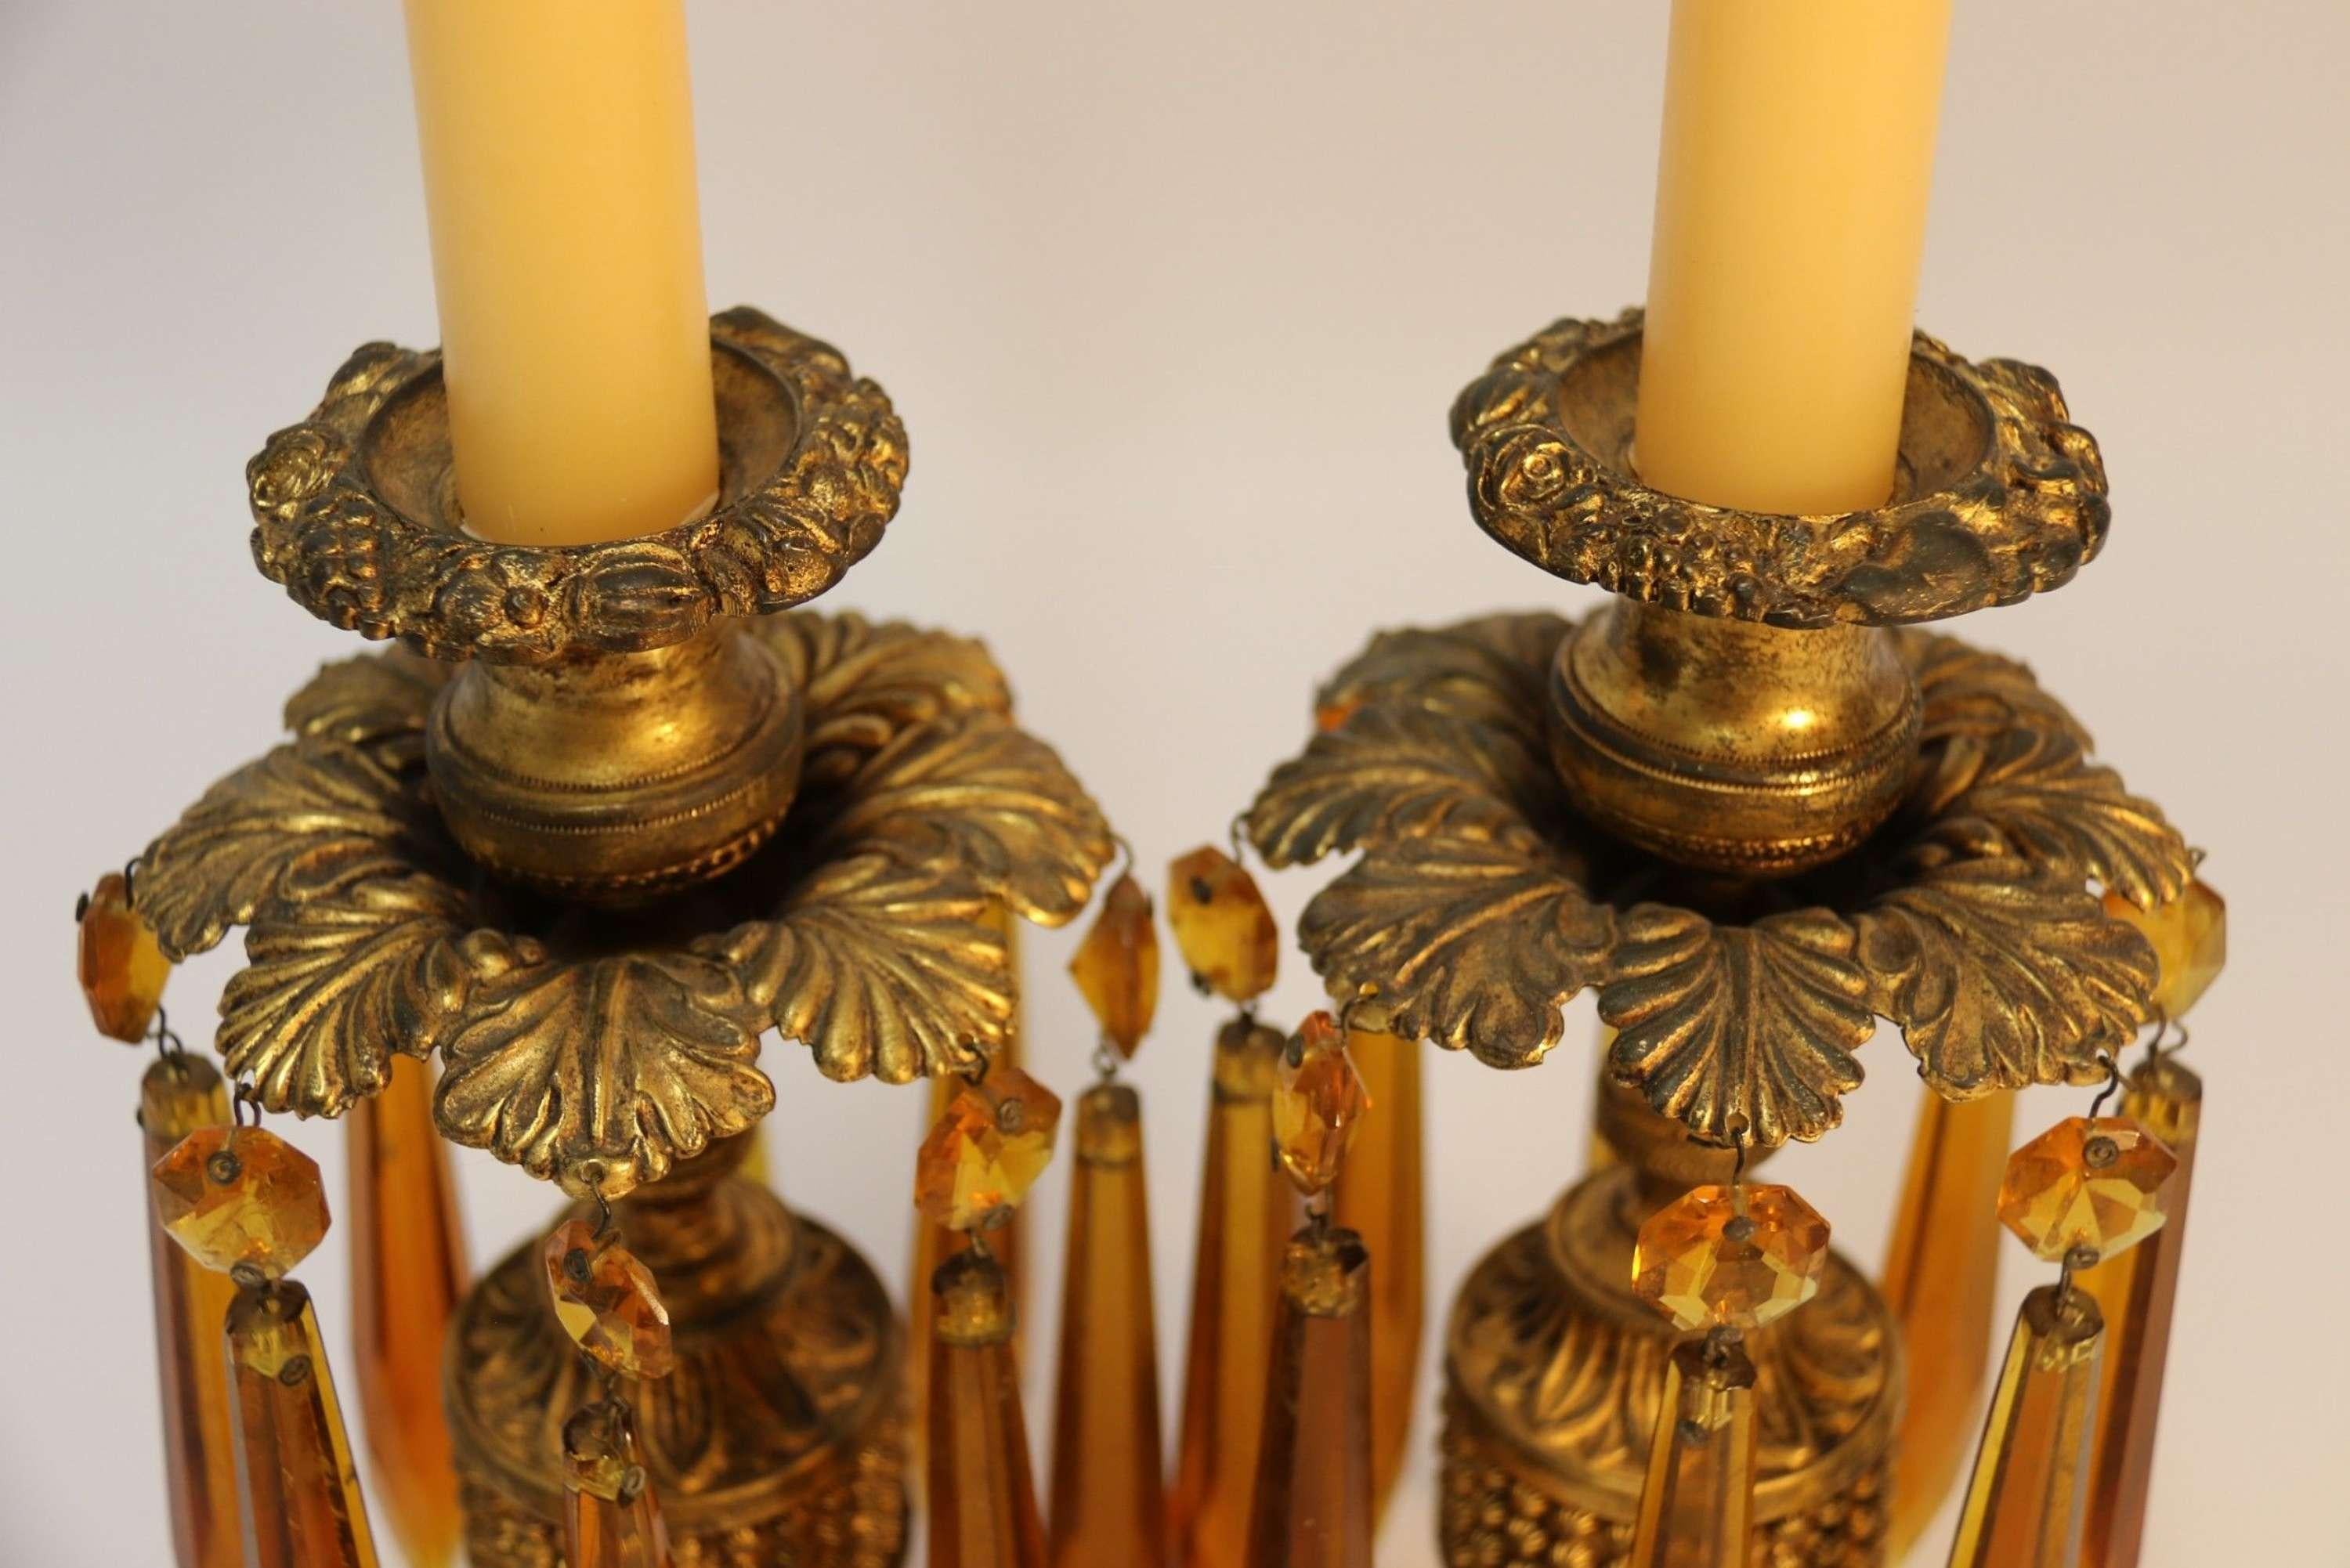 A fine pair of Regency Luster Candlesticks

A rare pair of English late Regency period weighted gilt brass and embossed candlesticks with the most unusual amber cut glass hanging lusters. They are in good original condition with original gilt